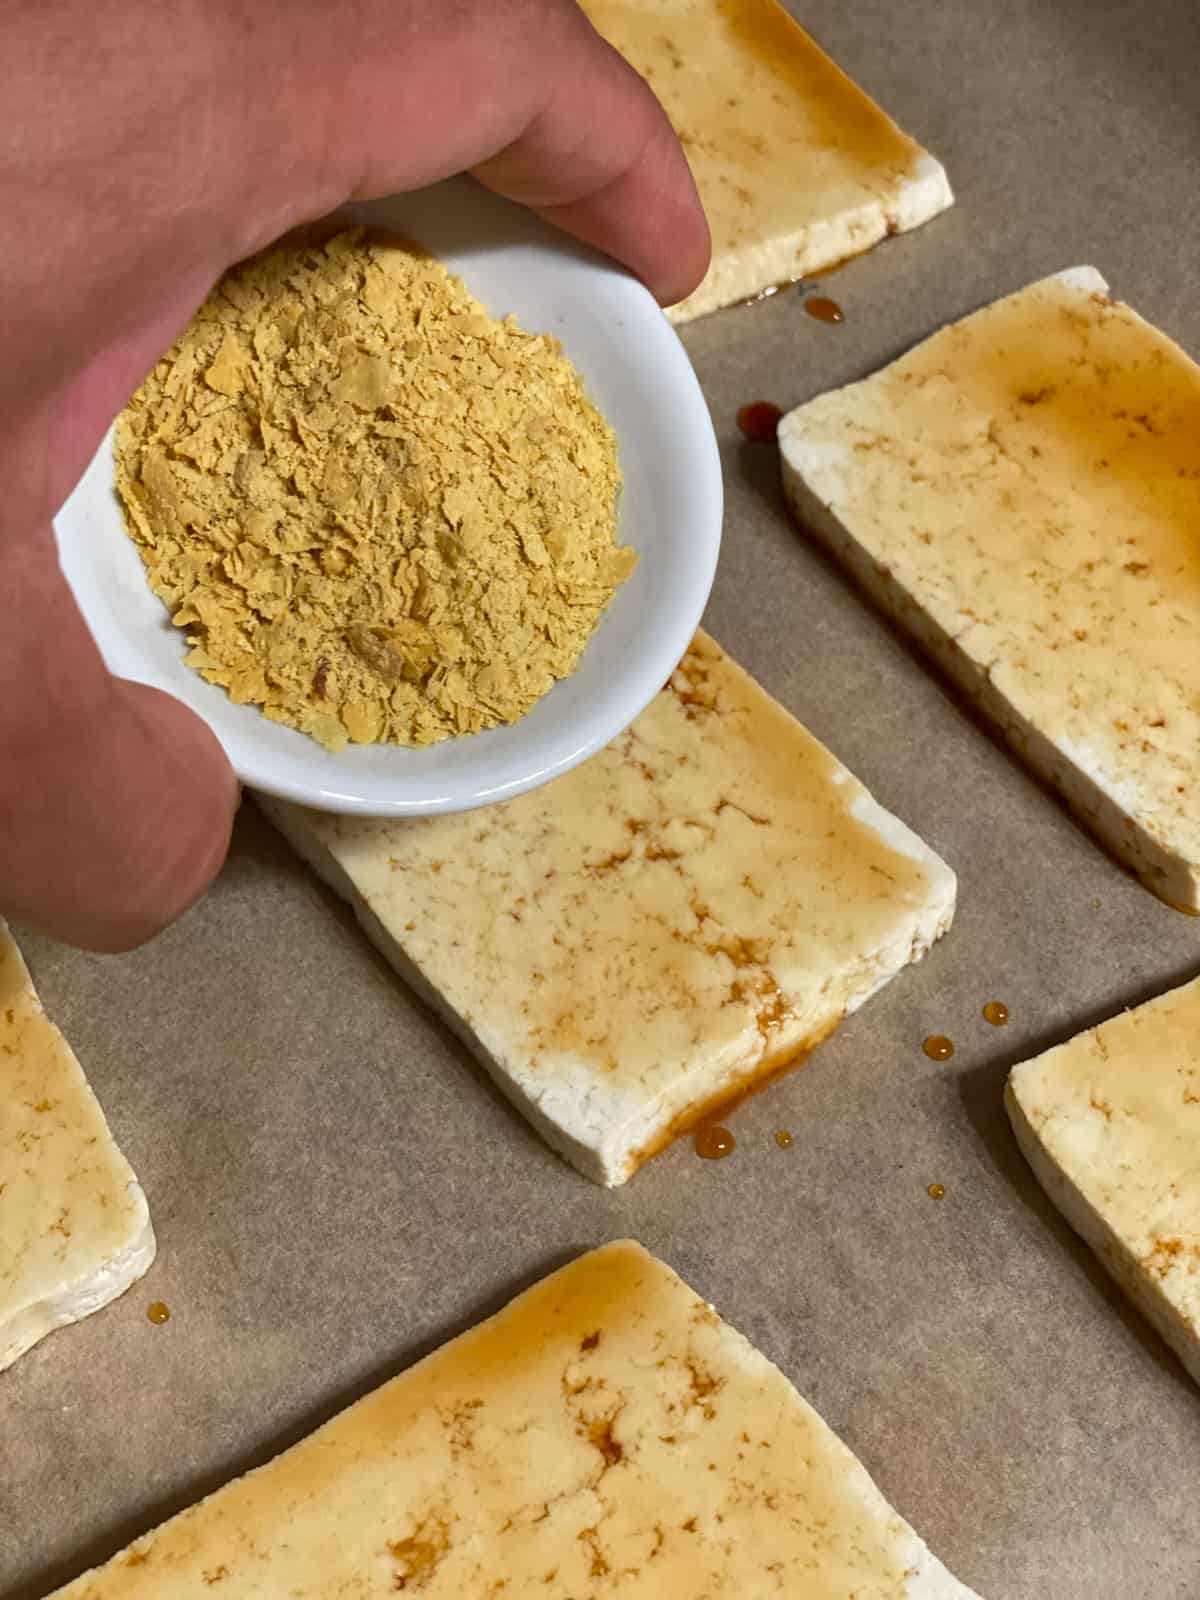 process shot of adding nutritional yeast to tofu slices